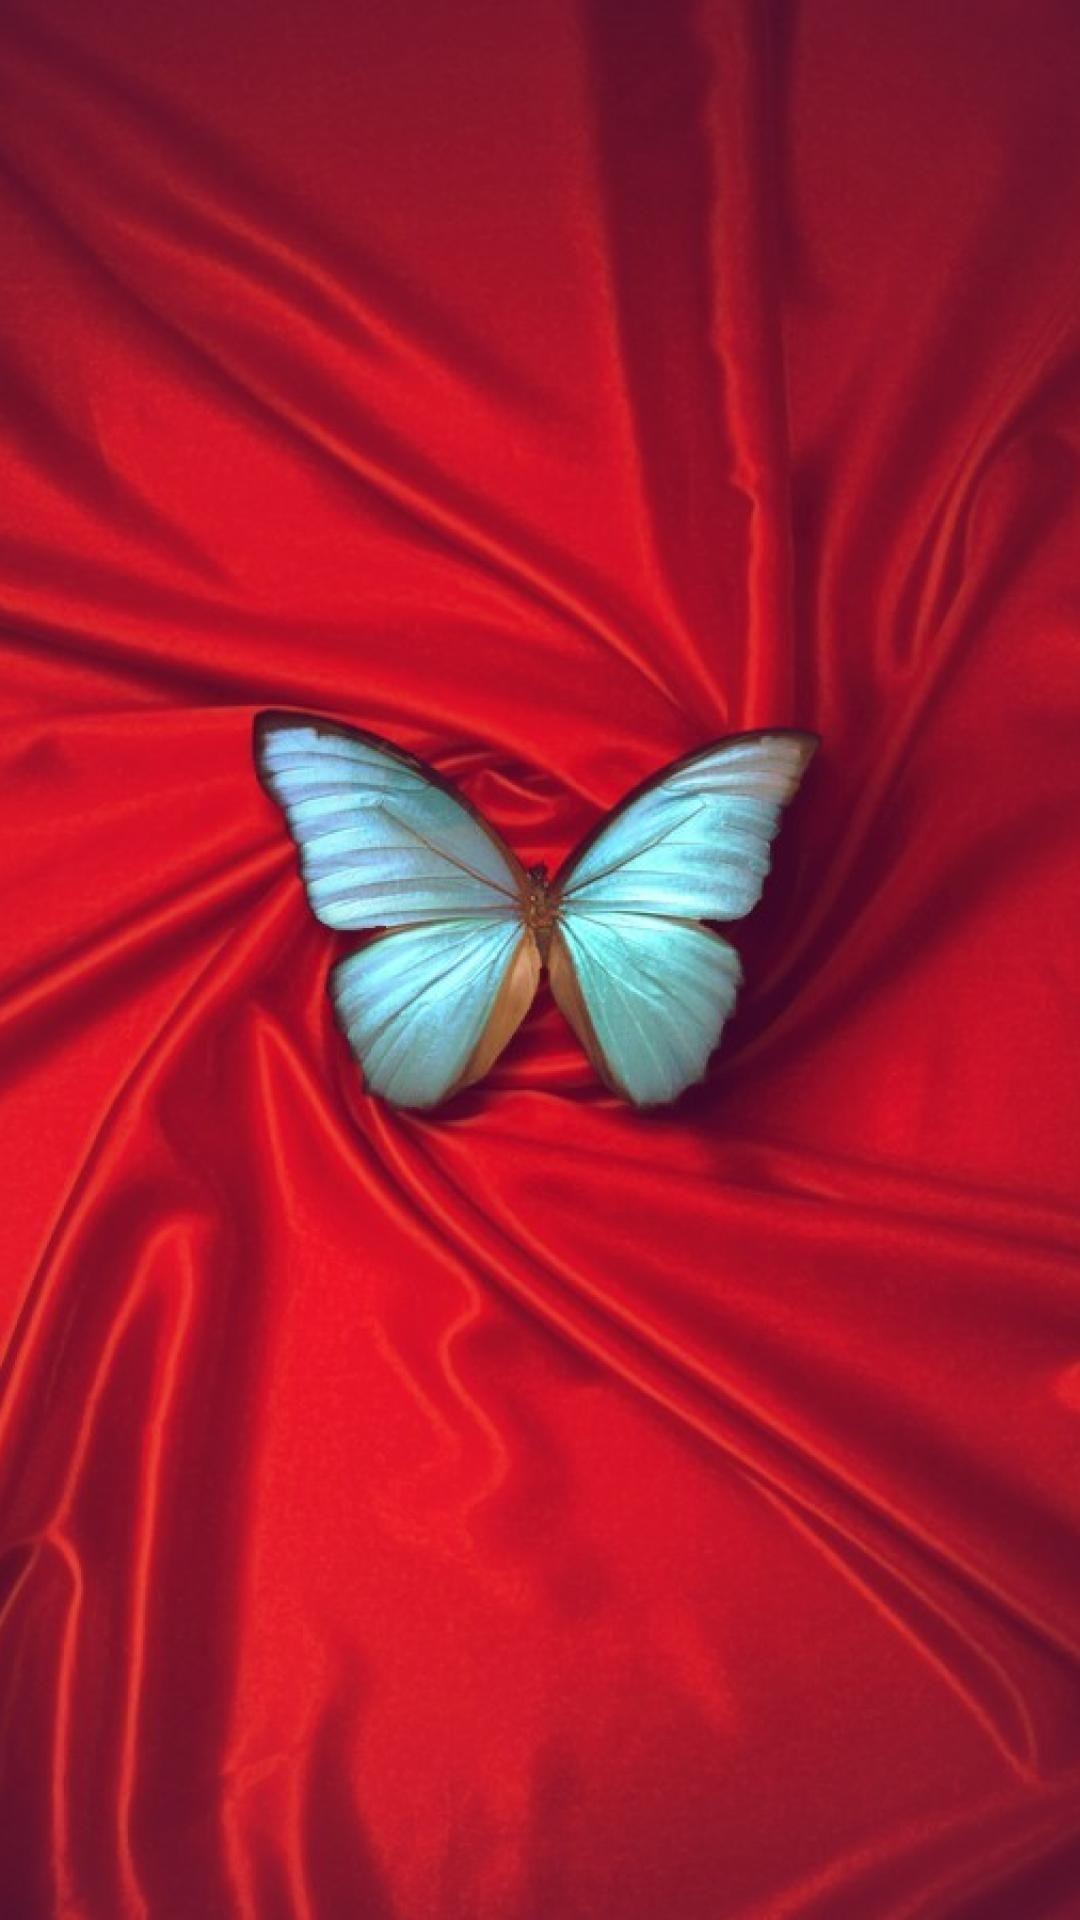 Colorful Butterfly Wallpapers. Interesting Standard With Colorful